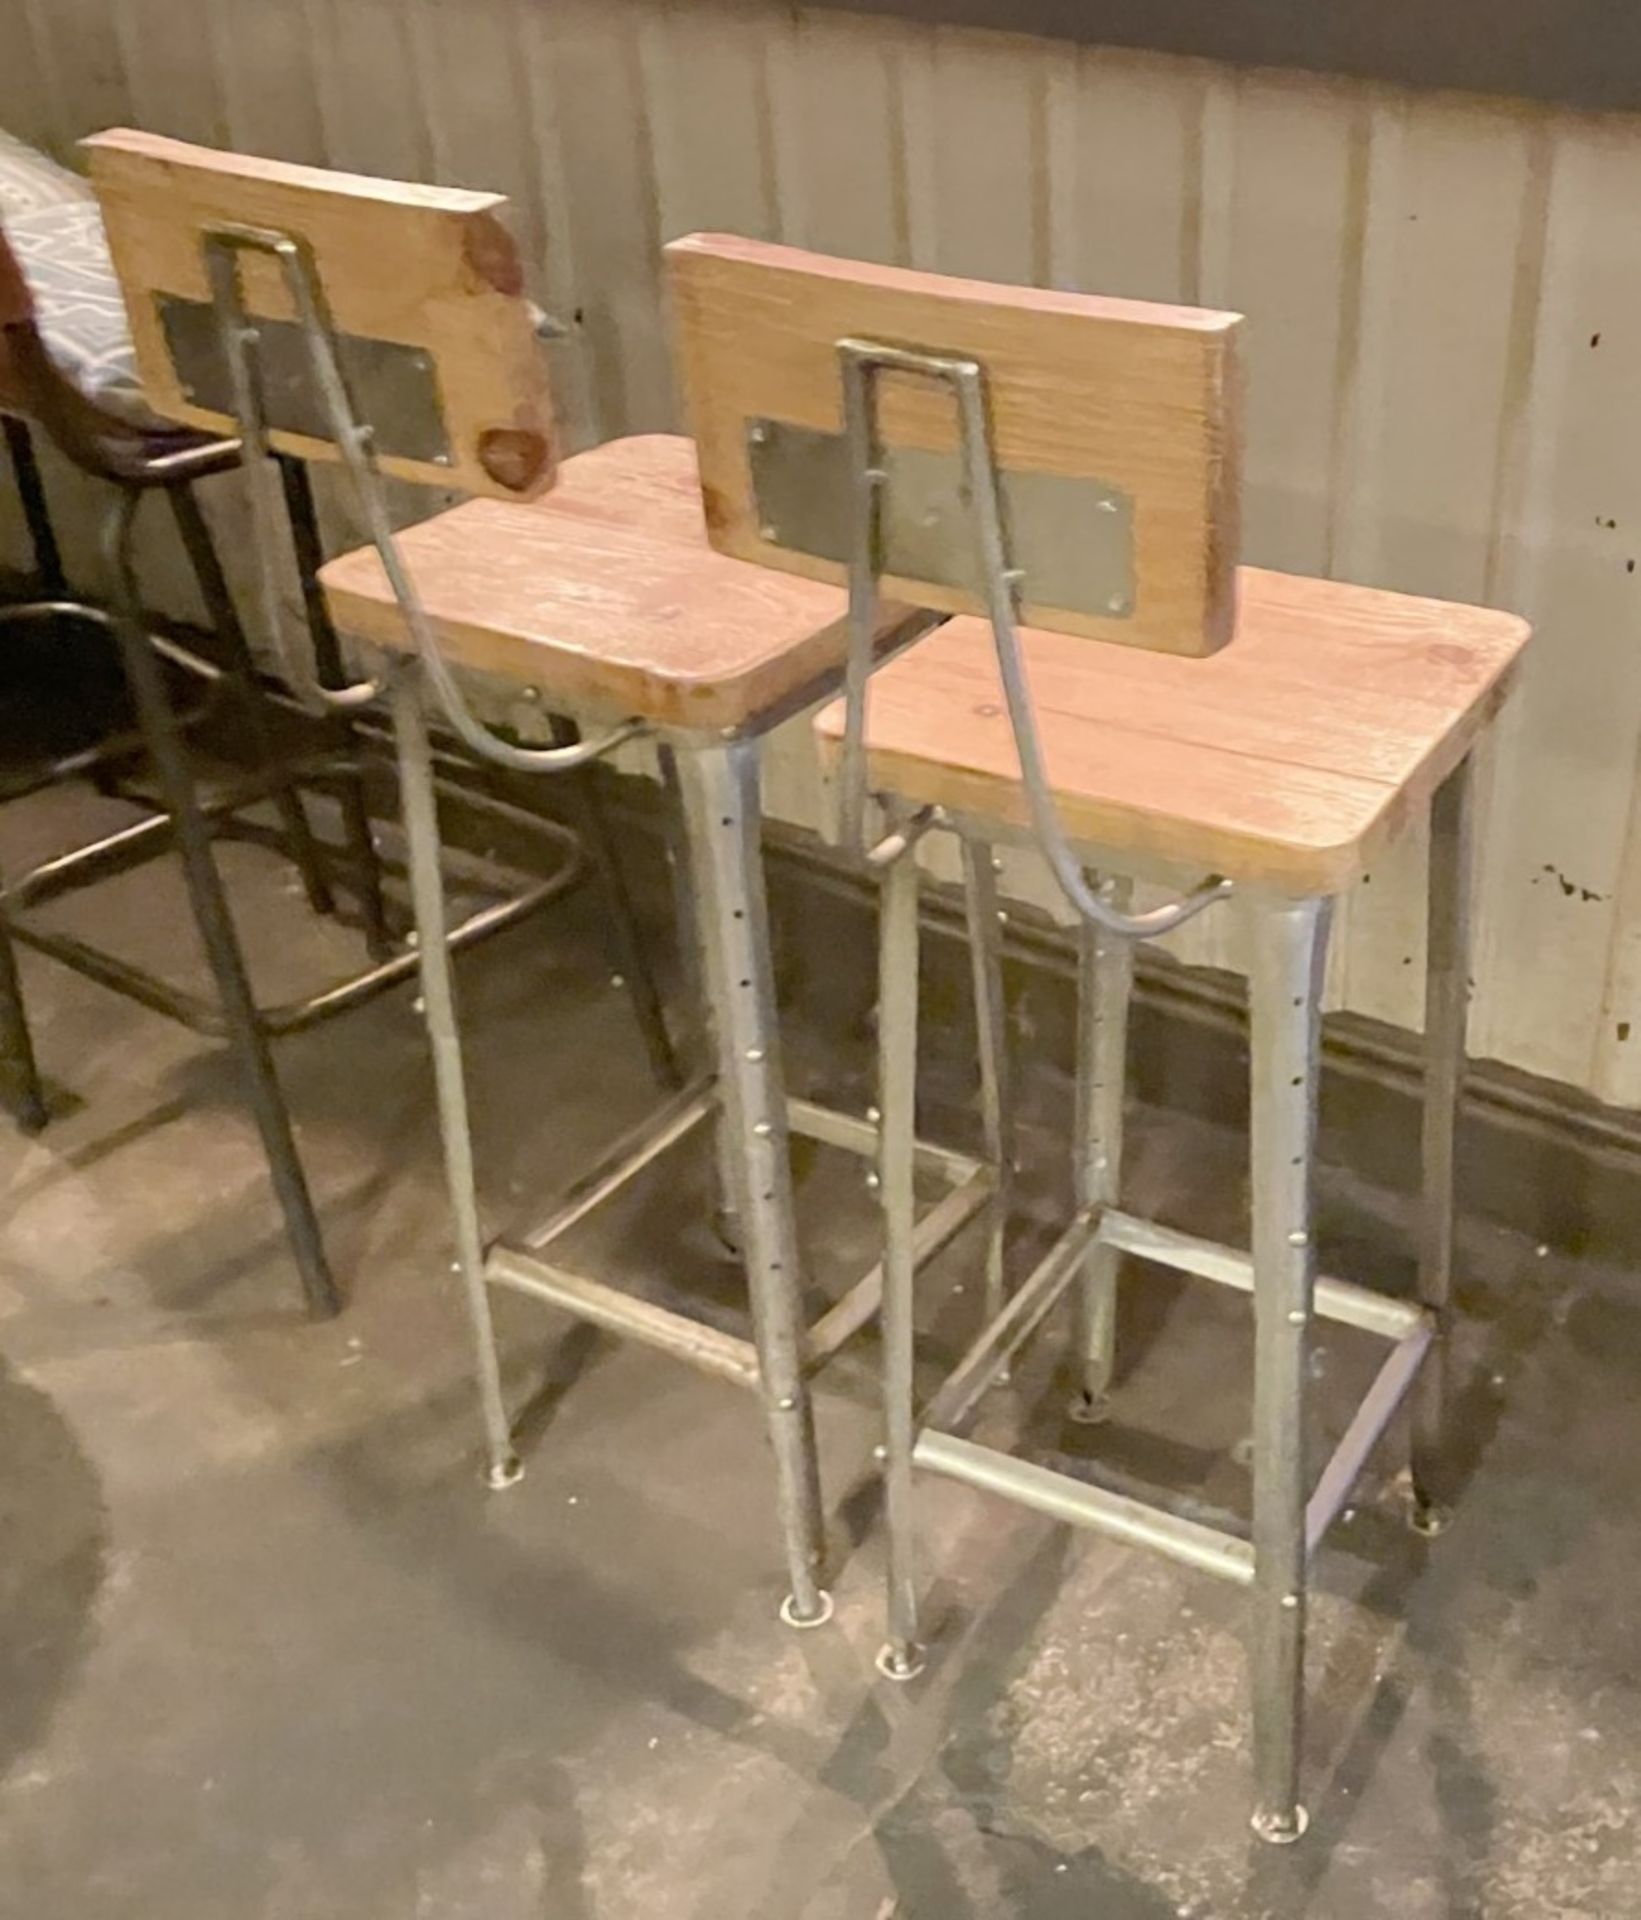 Pair of Industrial-style Bar Stools with Solid Wood Seats and Scooped Backrests - Image 3 of 4